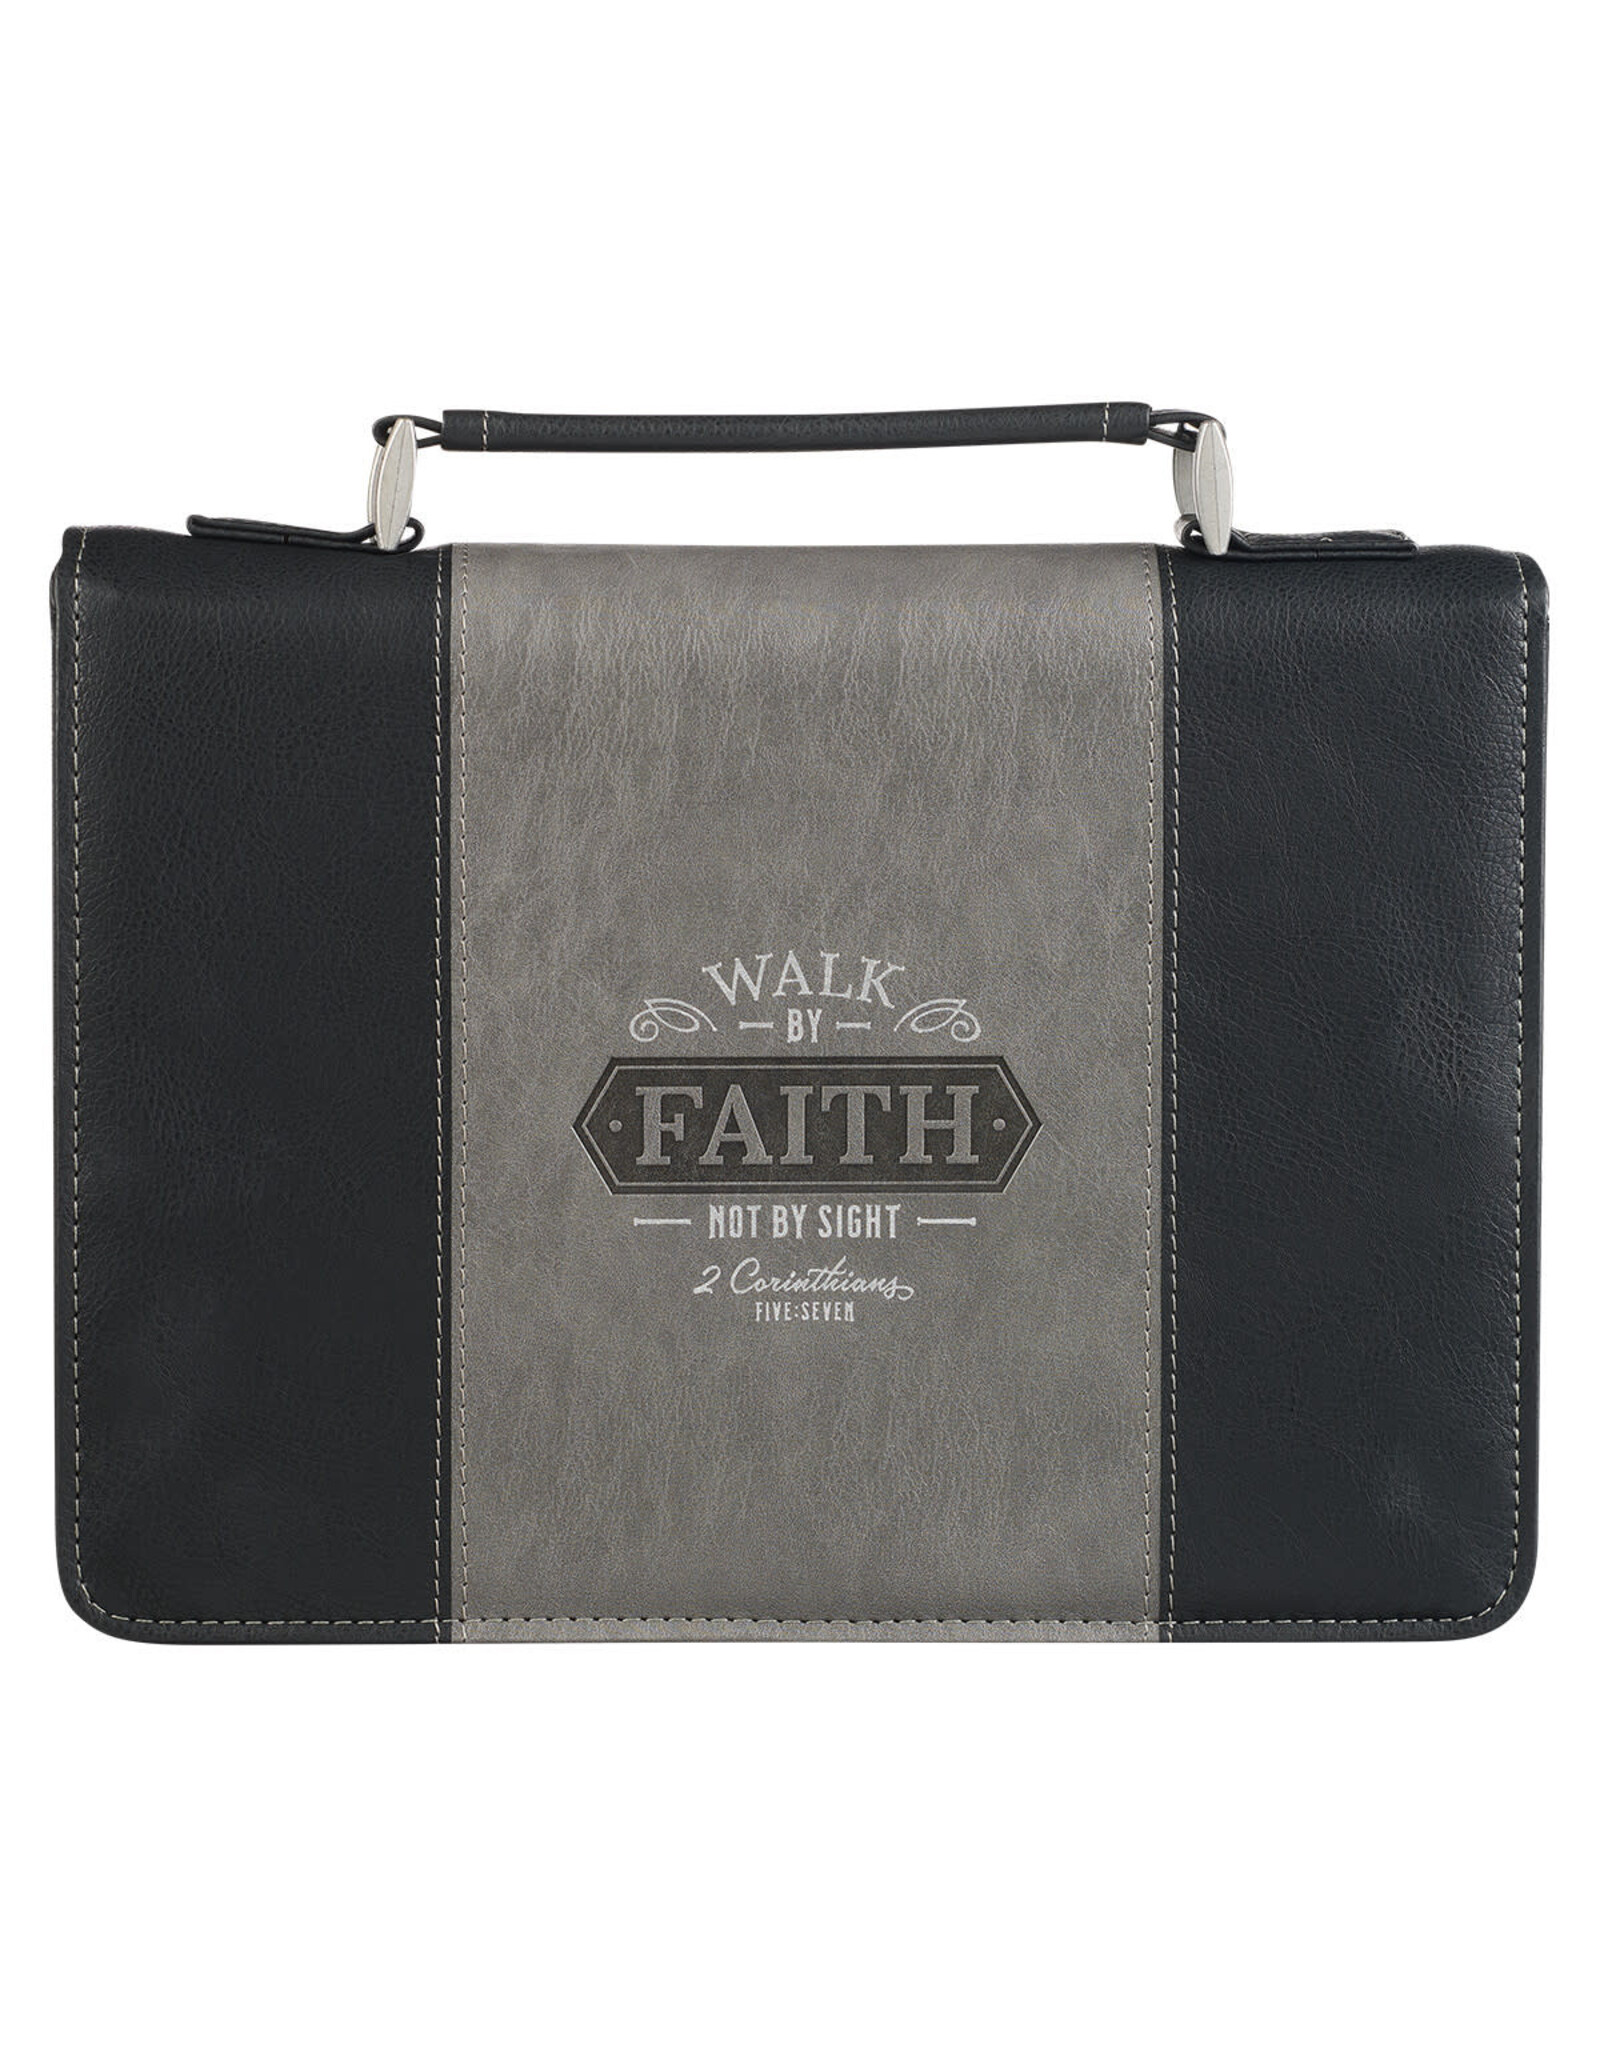 Christian Art Gifts Bible Cover - Walk by Faith, Black & Gray Faux Leather (2 Corinthians 5:7),